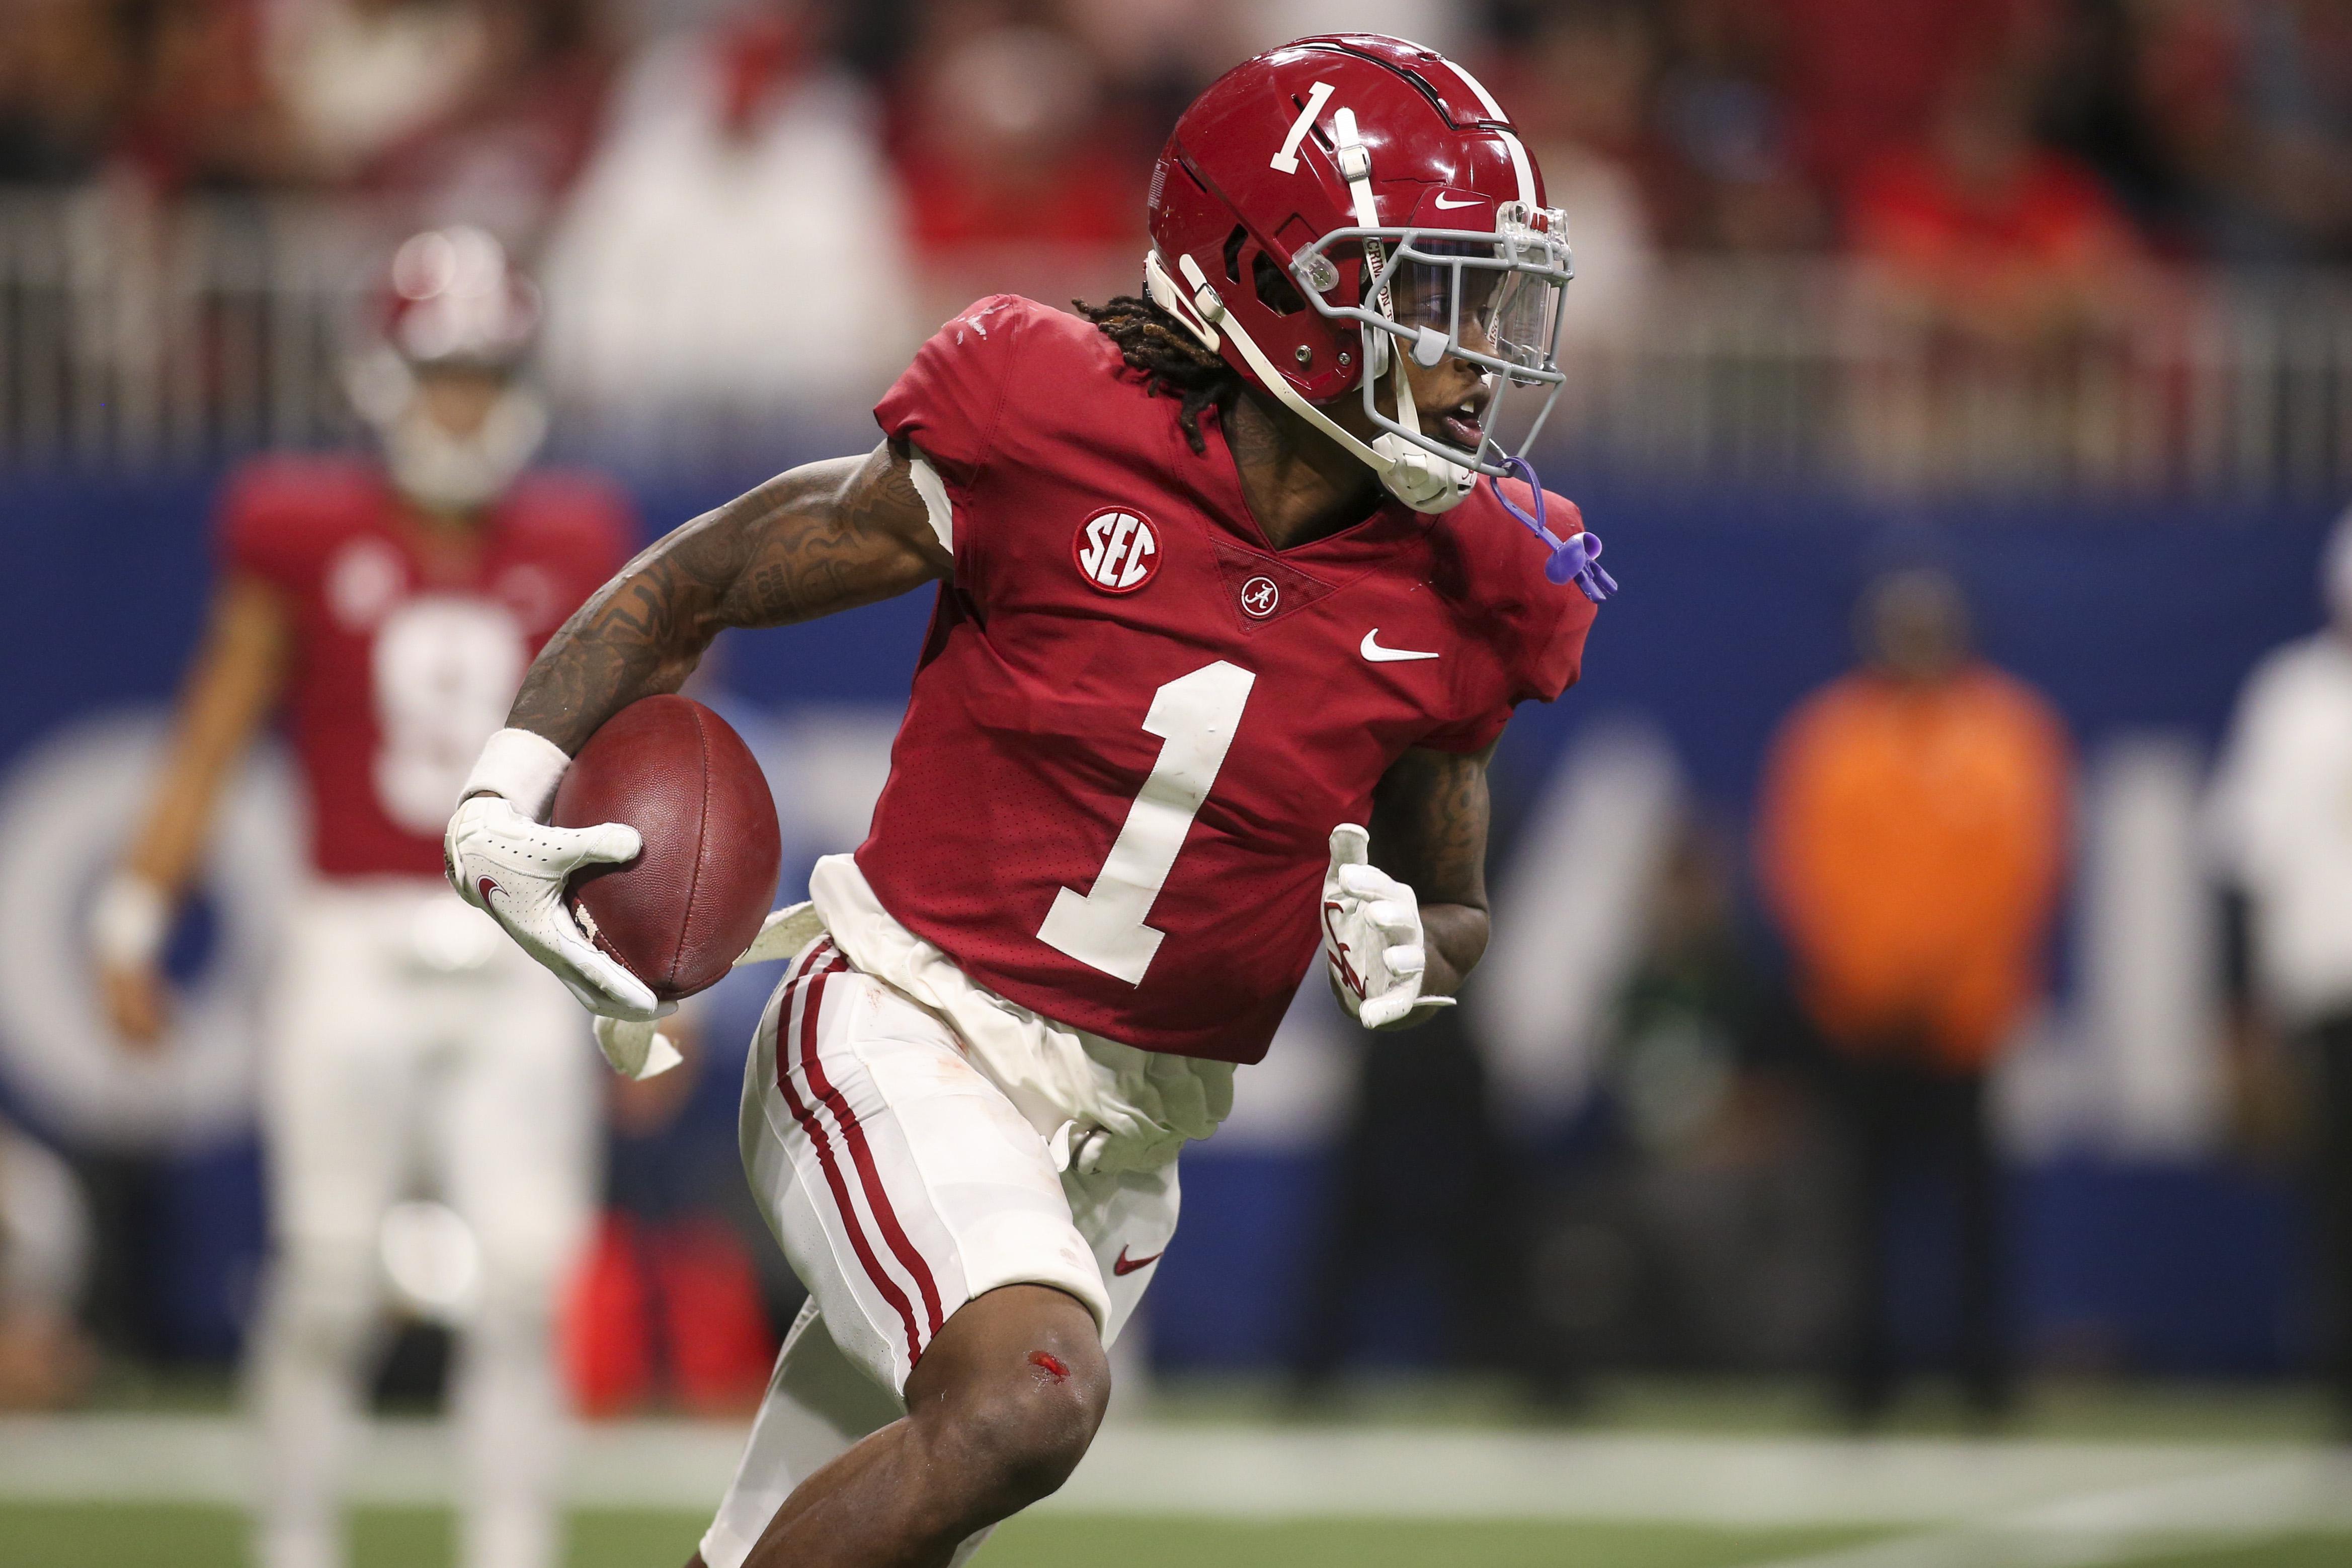 List of Alabama Players Declared for NFL Draft 2022